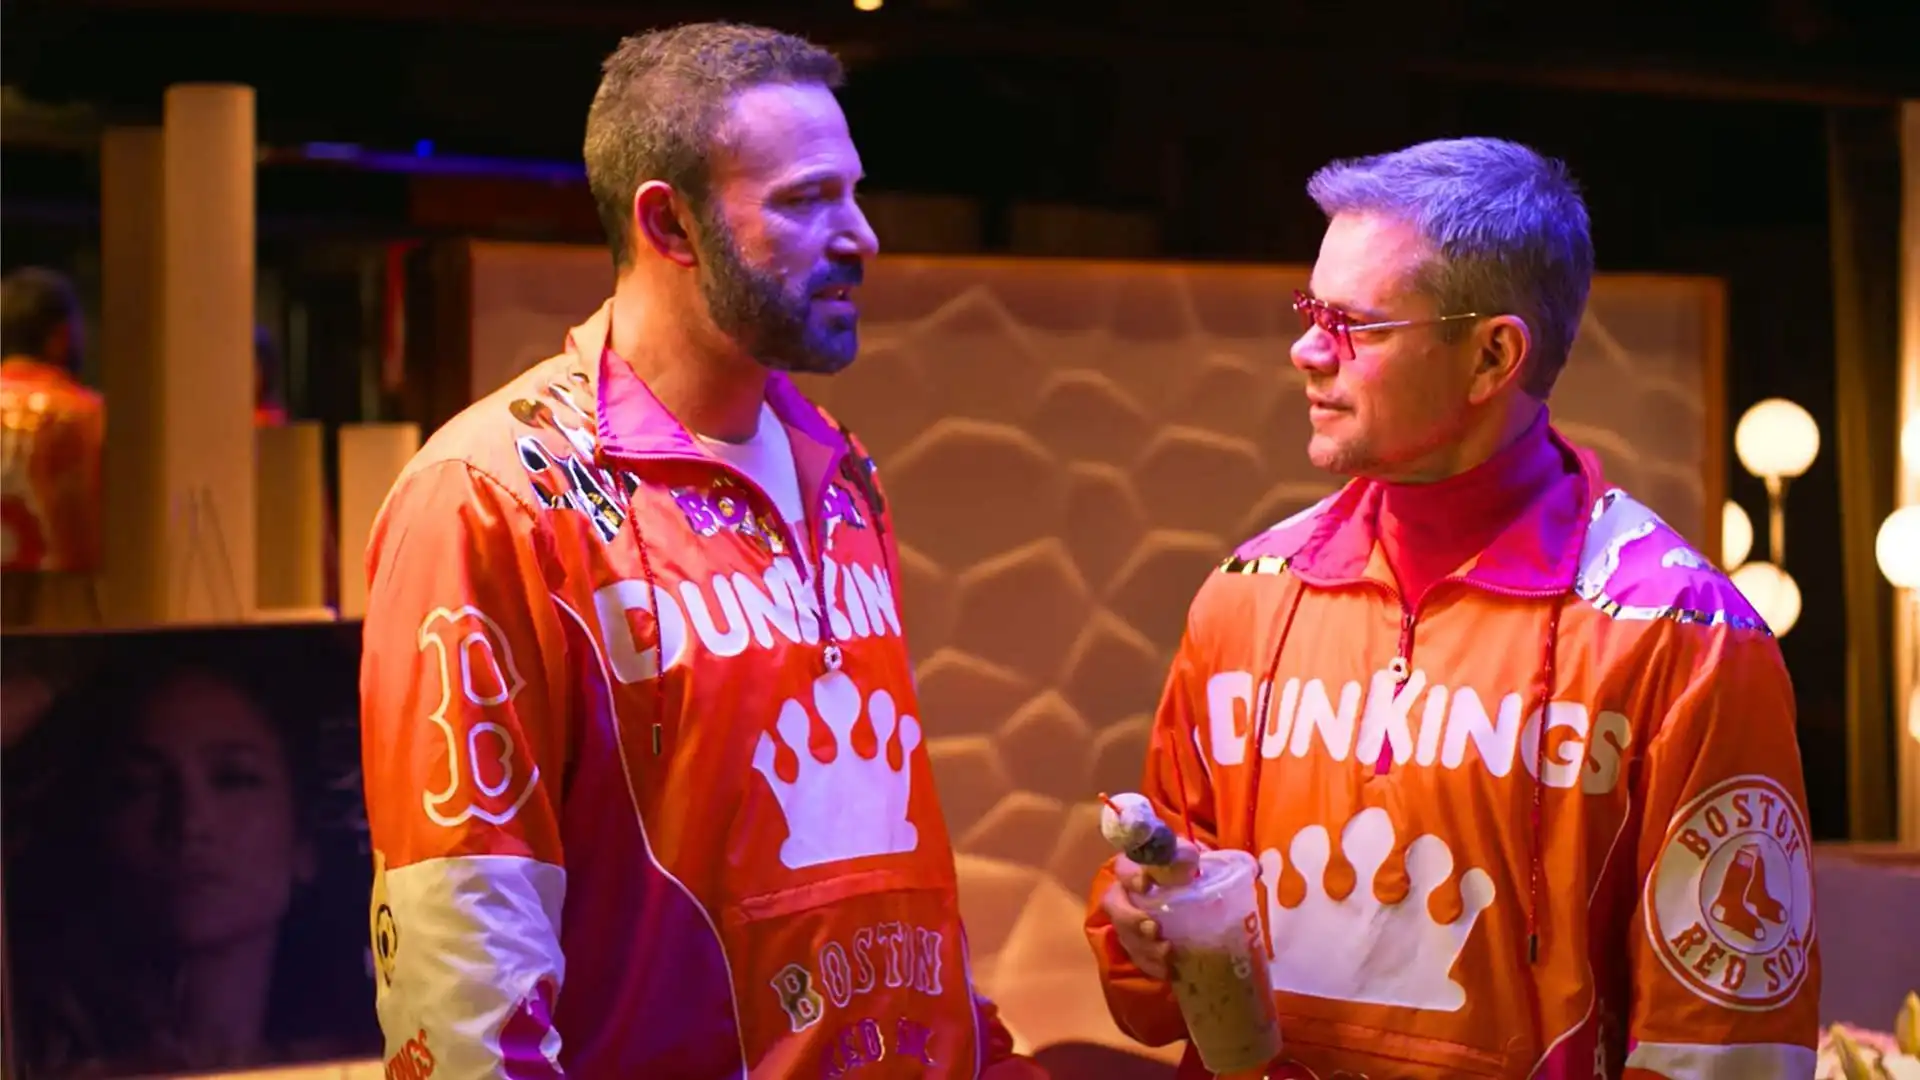 Ben Affleck introduces Dunkins boy band with Matt Damon in Super Bowl commercial